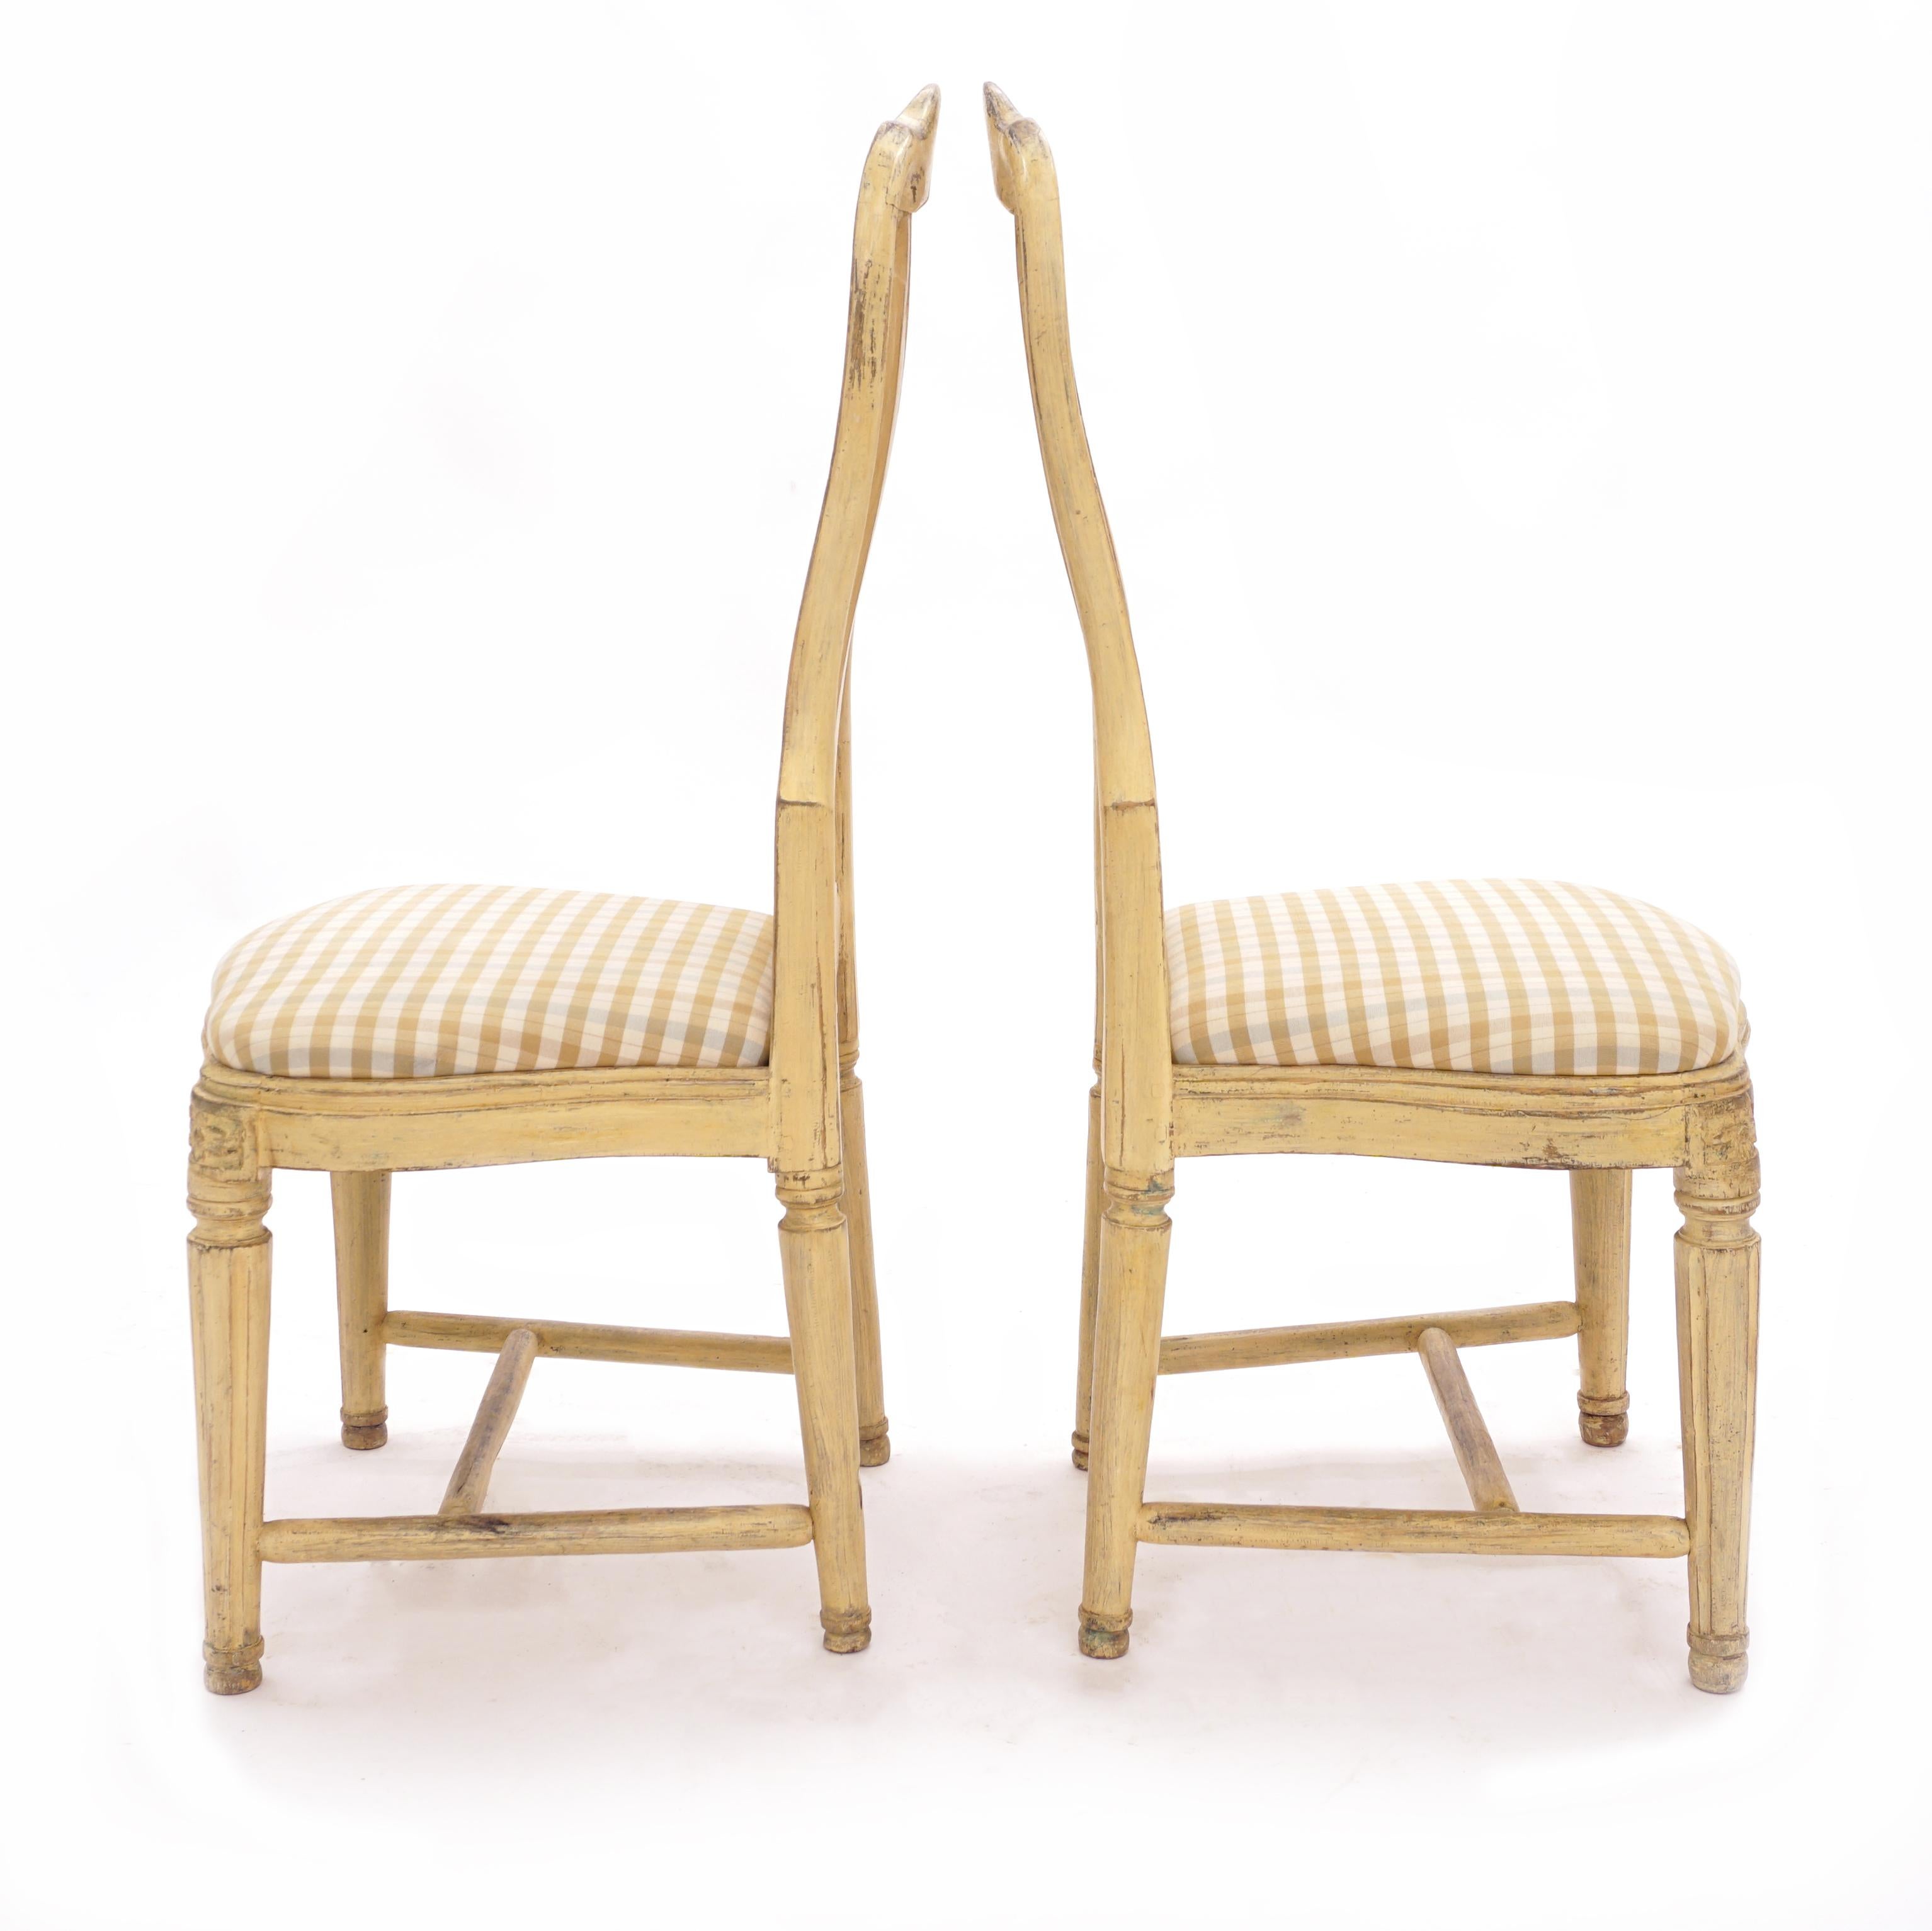 Late 18th Century Swedish Pair Og Gustavian Chairs, Sweden, circa 1780-1800 In Good Condition For Sale In Aabenraa, DK